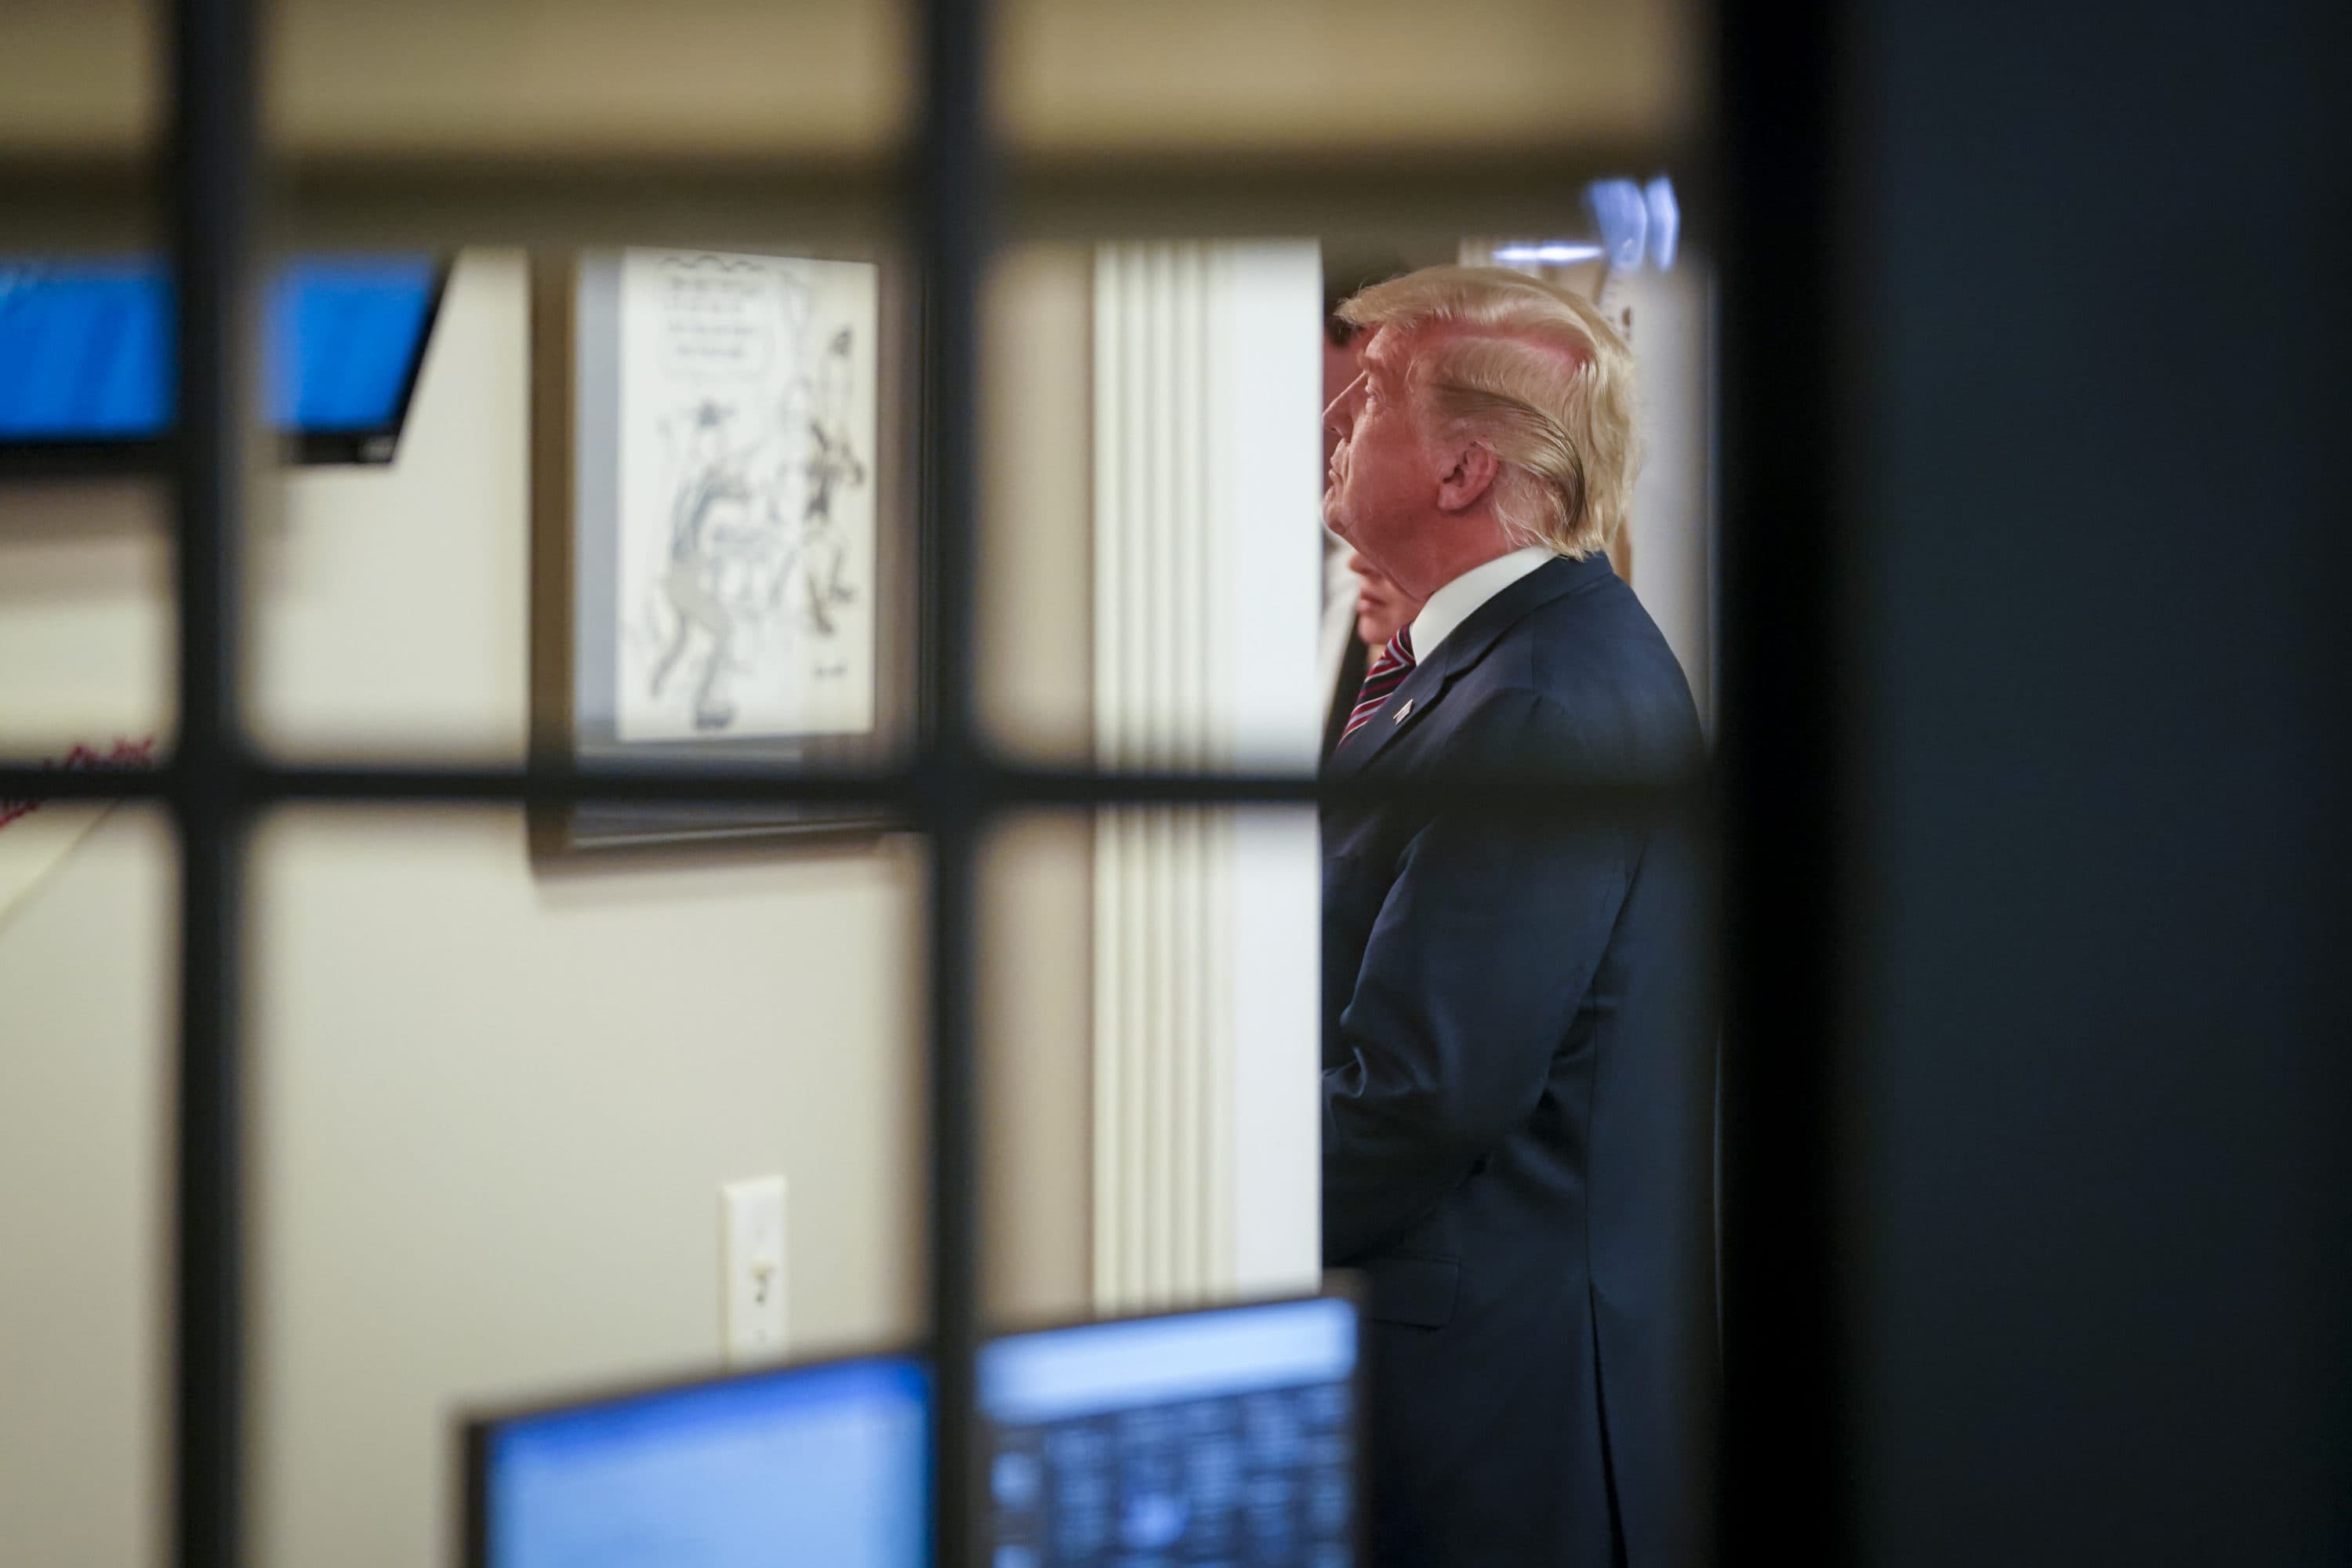 President Donald J. Trump is seen in the lower press office after finishing speaking in the James S. Brady Press Briefing Room at the White House on Thursday, November 05, 2020 in Washington, DC. (Jabin Botsford/The Washington Post via Getty Images)